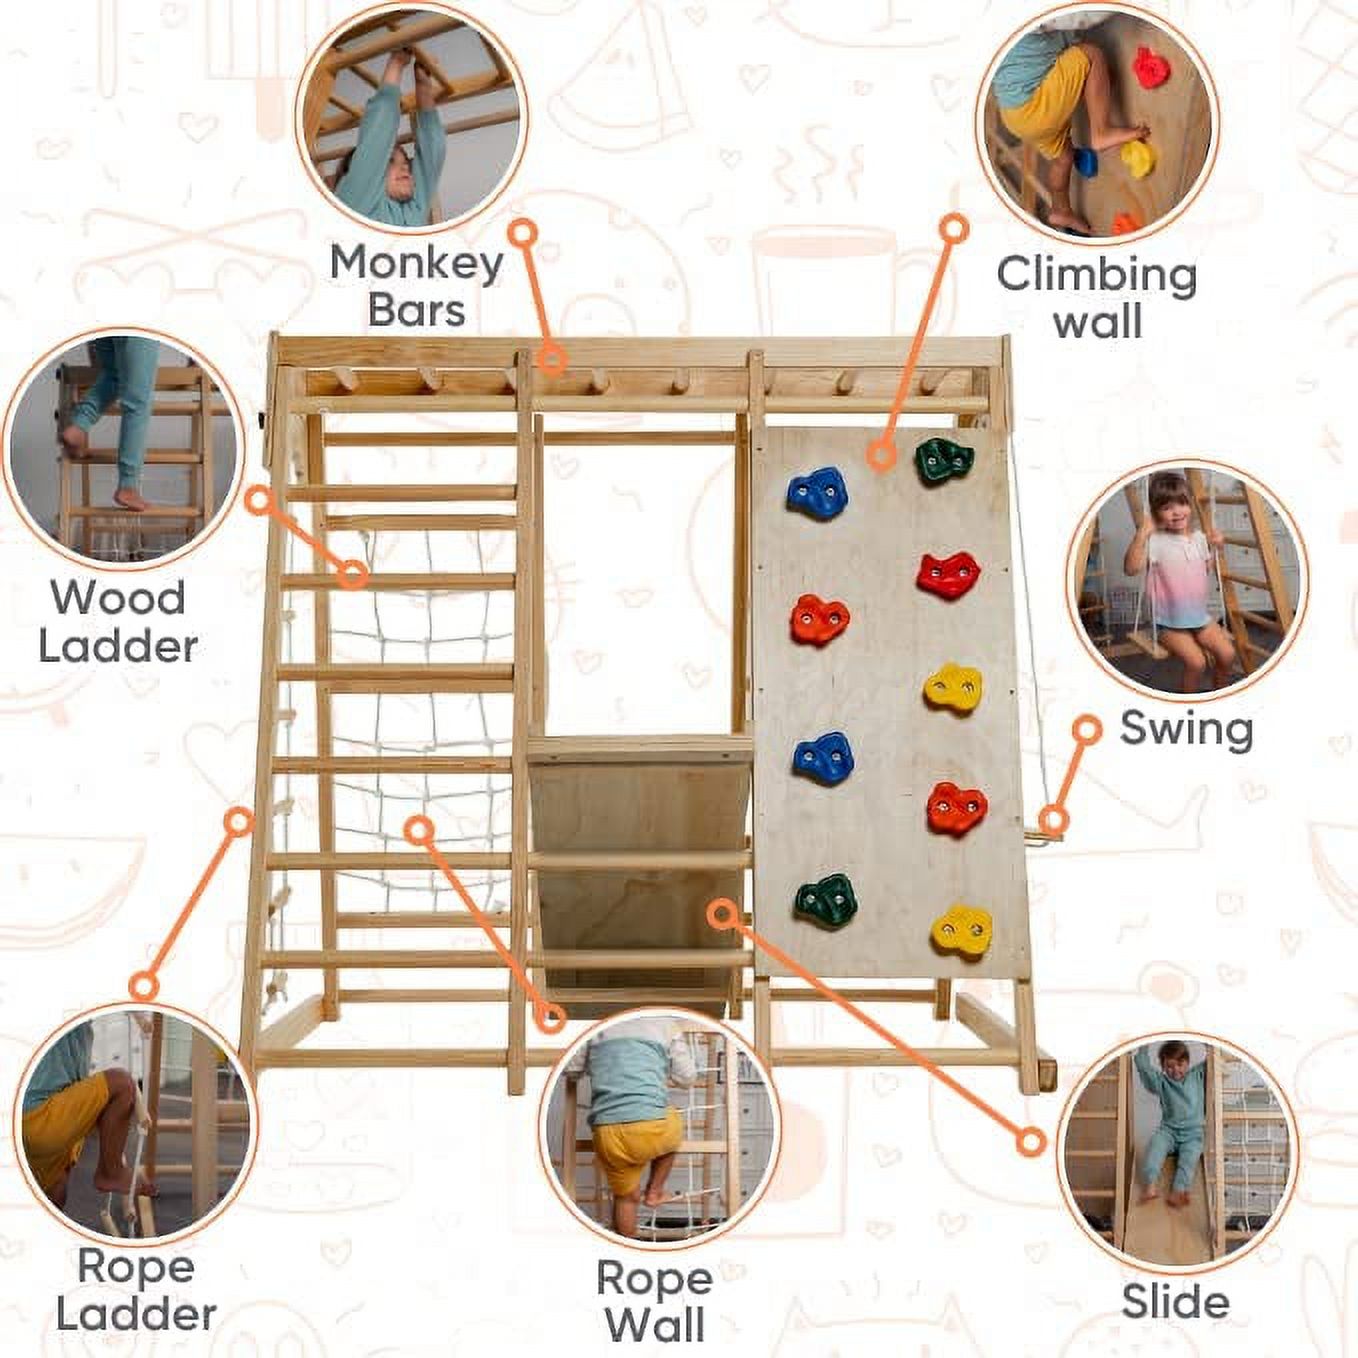 Avenlur Magnolia Indoor Playground 6-in-1 Jungle Gym Montessori Waldorf Style Wooden Climber Playset Slide, Rock Climbing Wall, Rope Wall Climber, Monkey Bars, Swing for Toddlers, Children Kids 2-6yrs - image 1 of 9